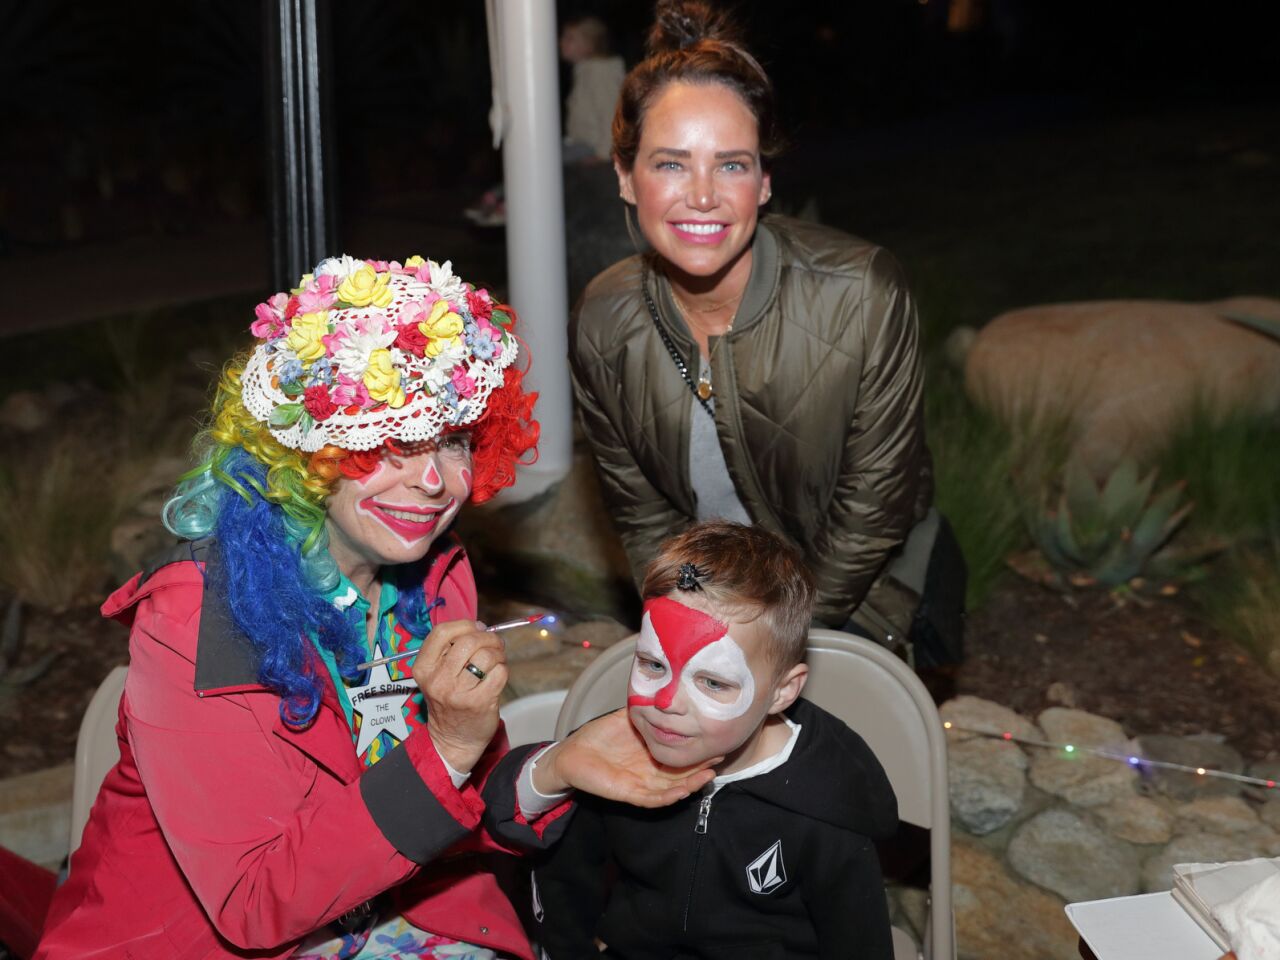 Mandy and Townsend Handy with the clown face painter